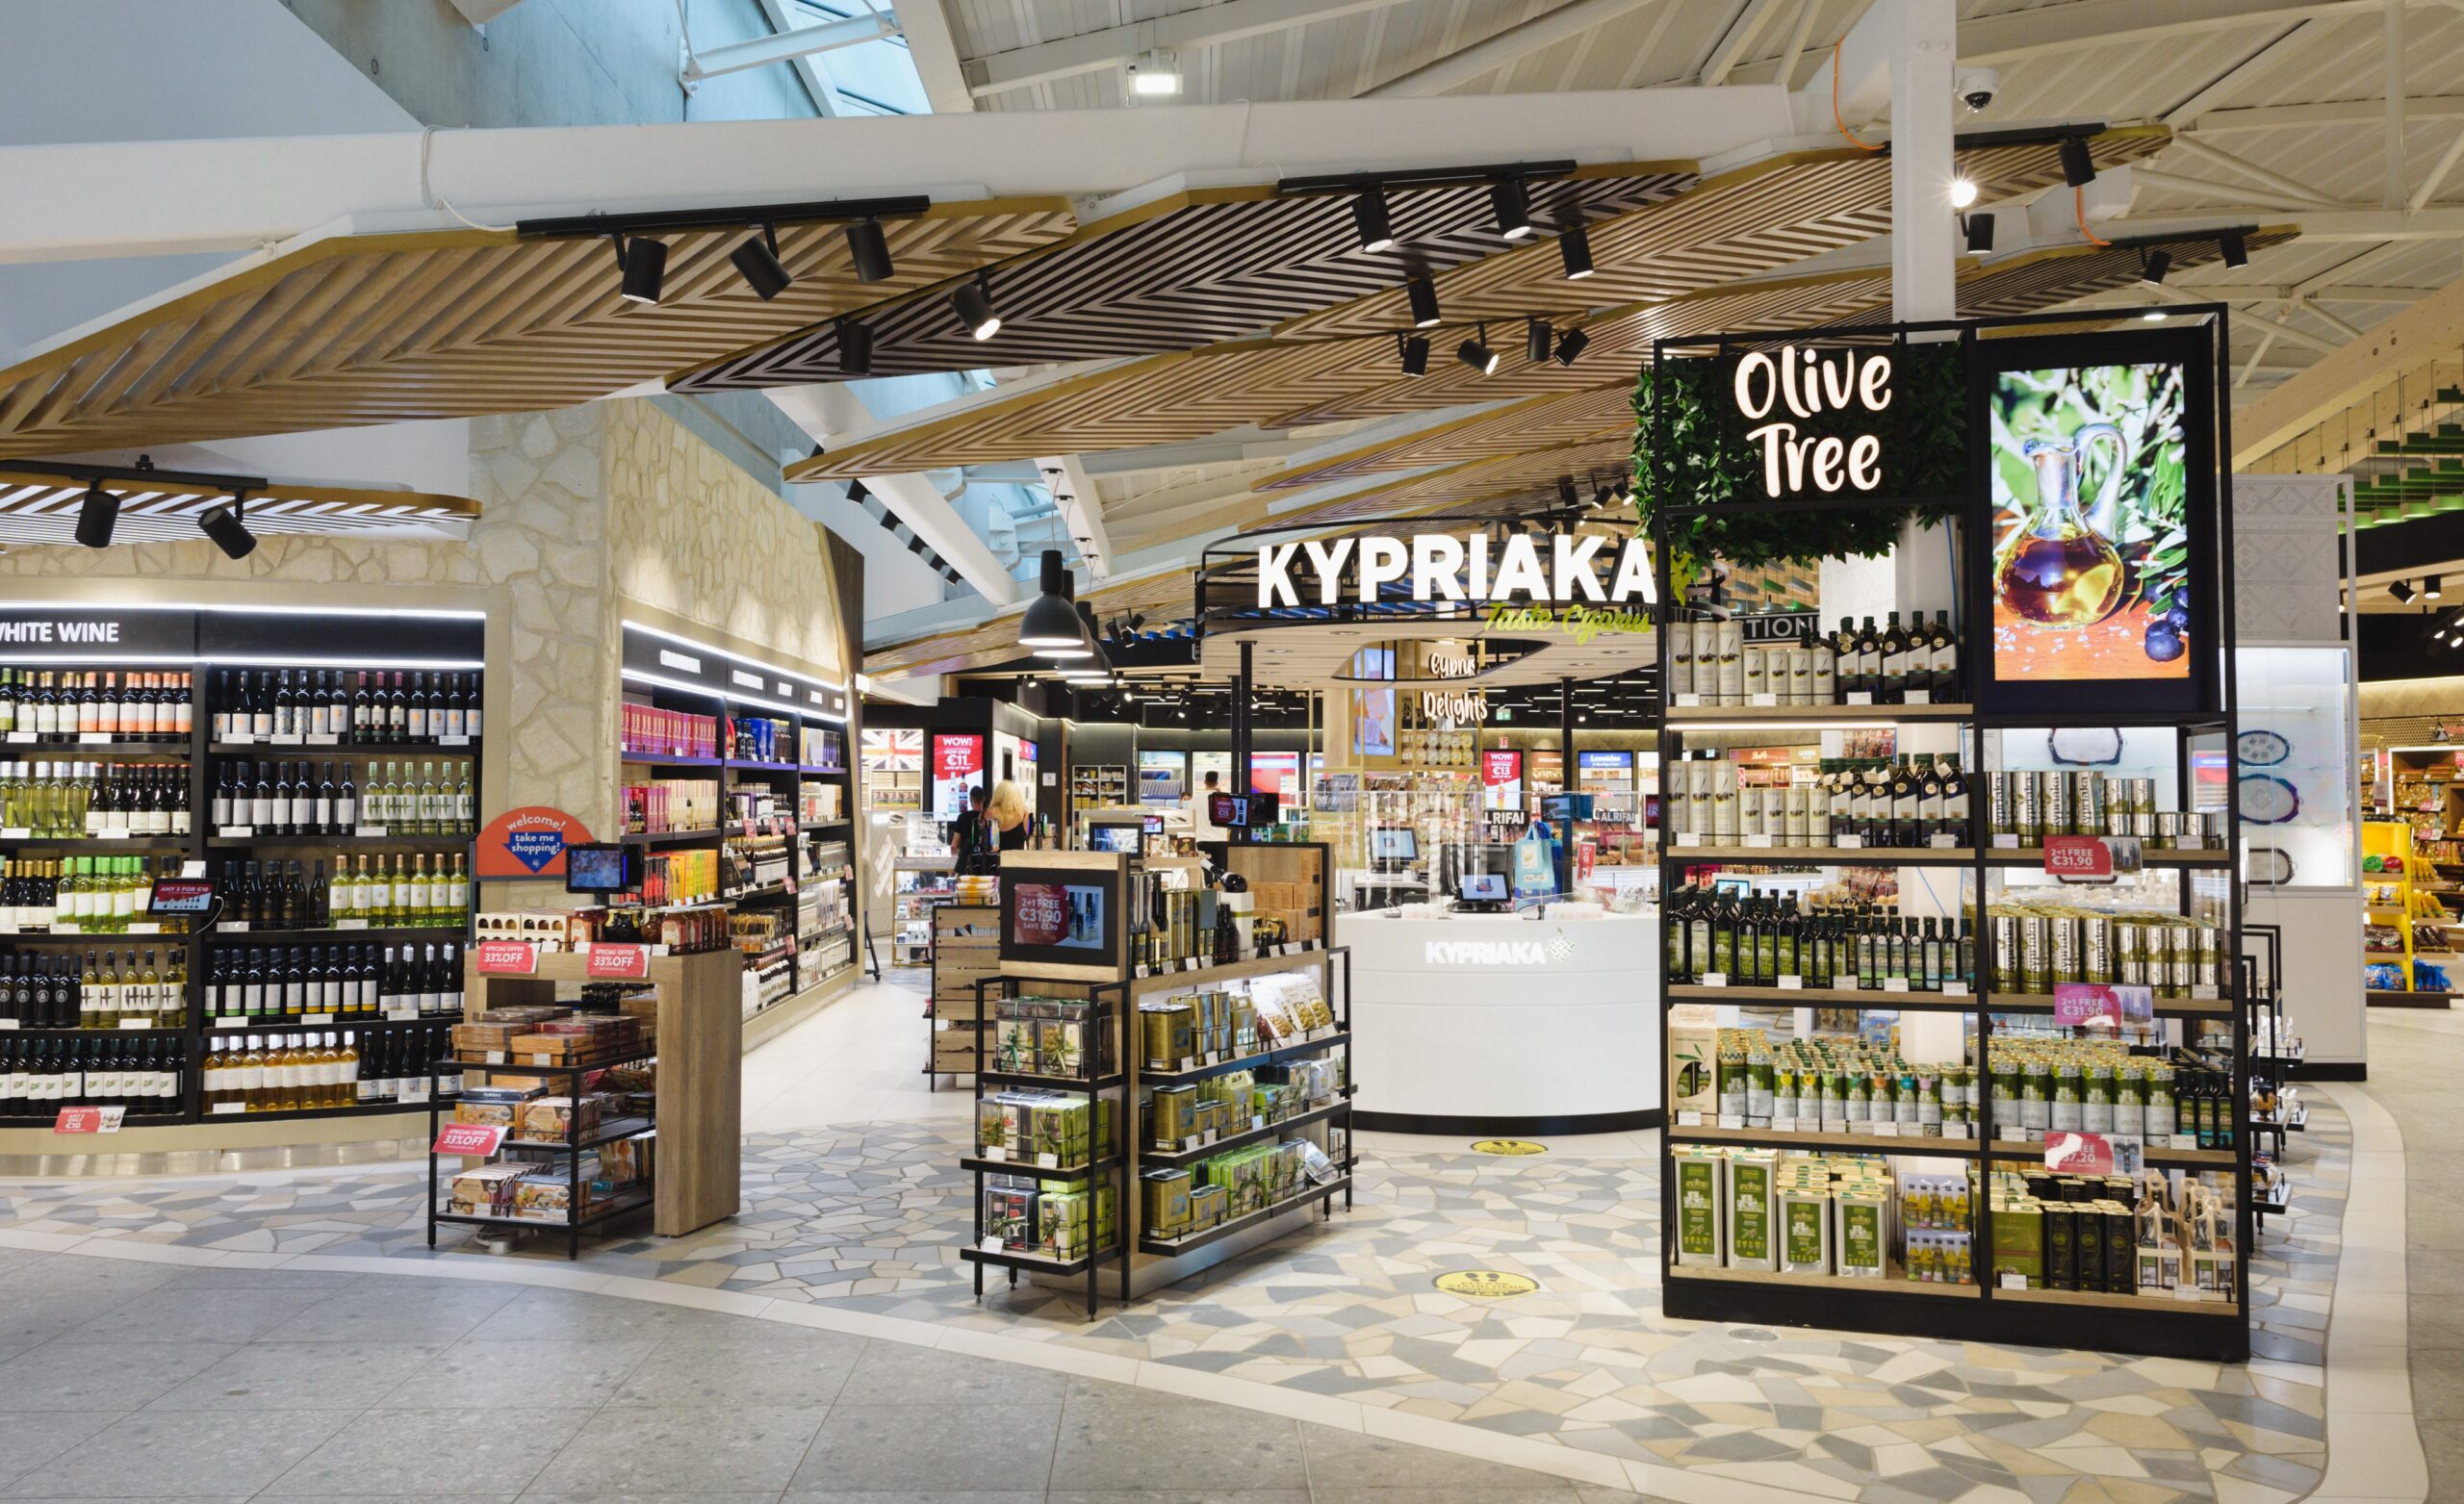 Kypriaka concept store at Cyprus Duty Free